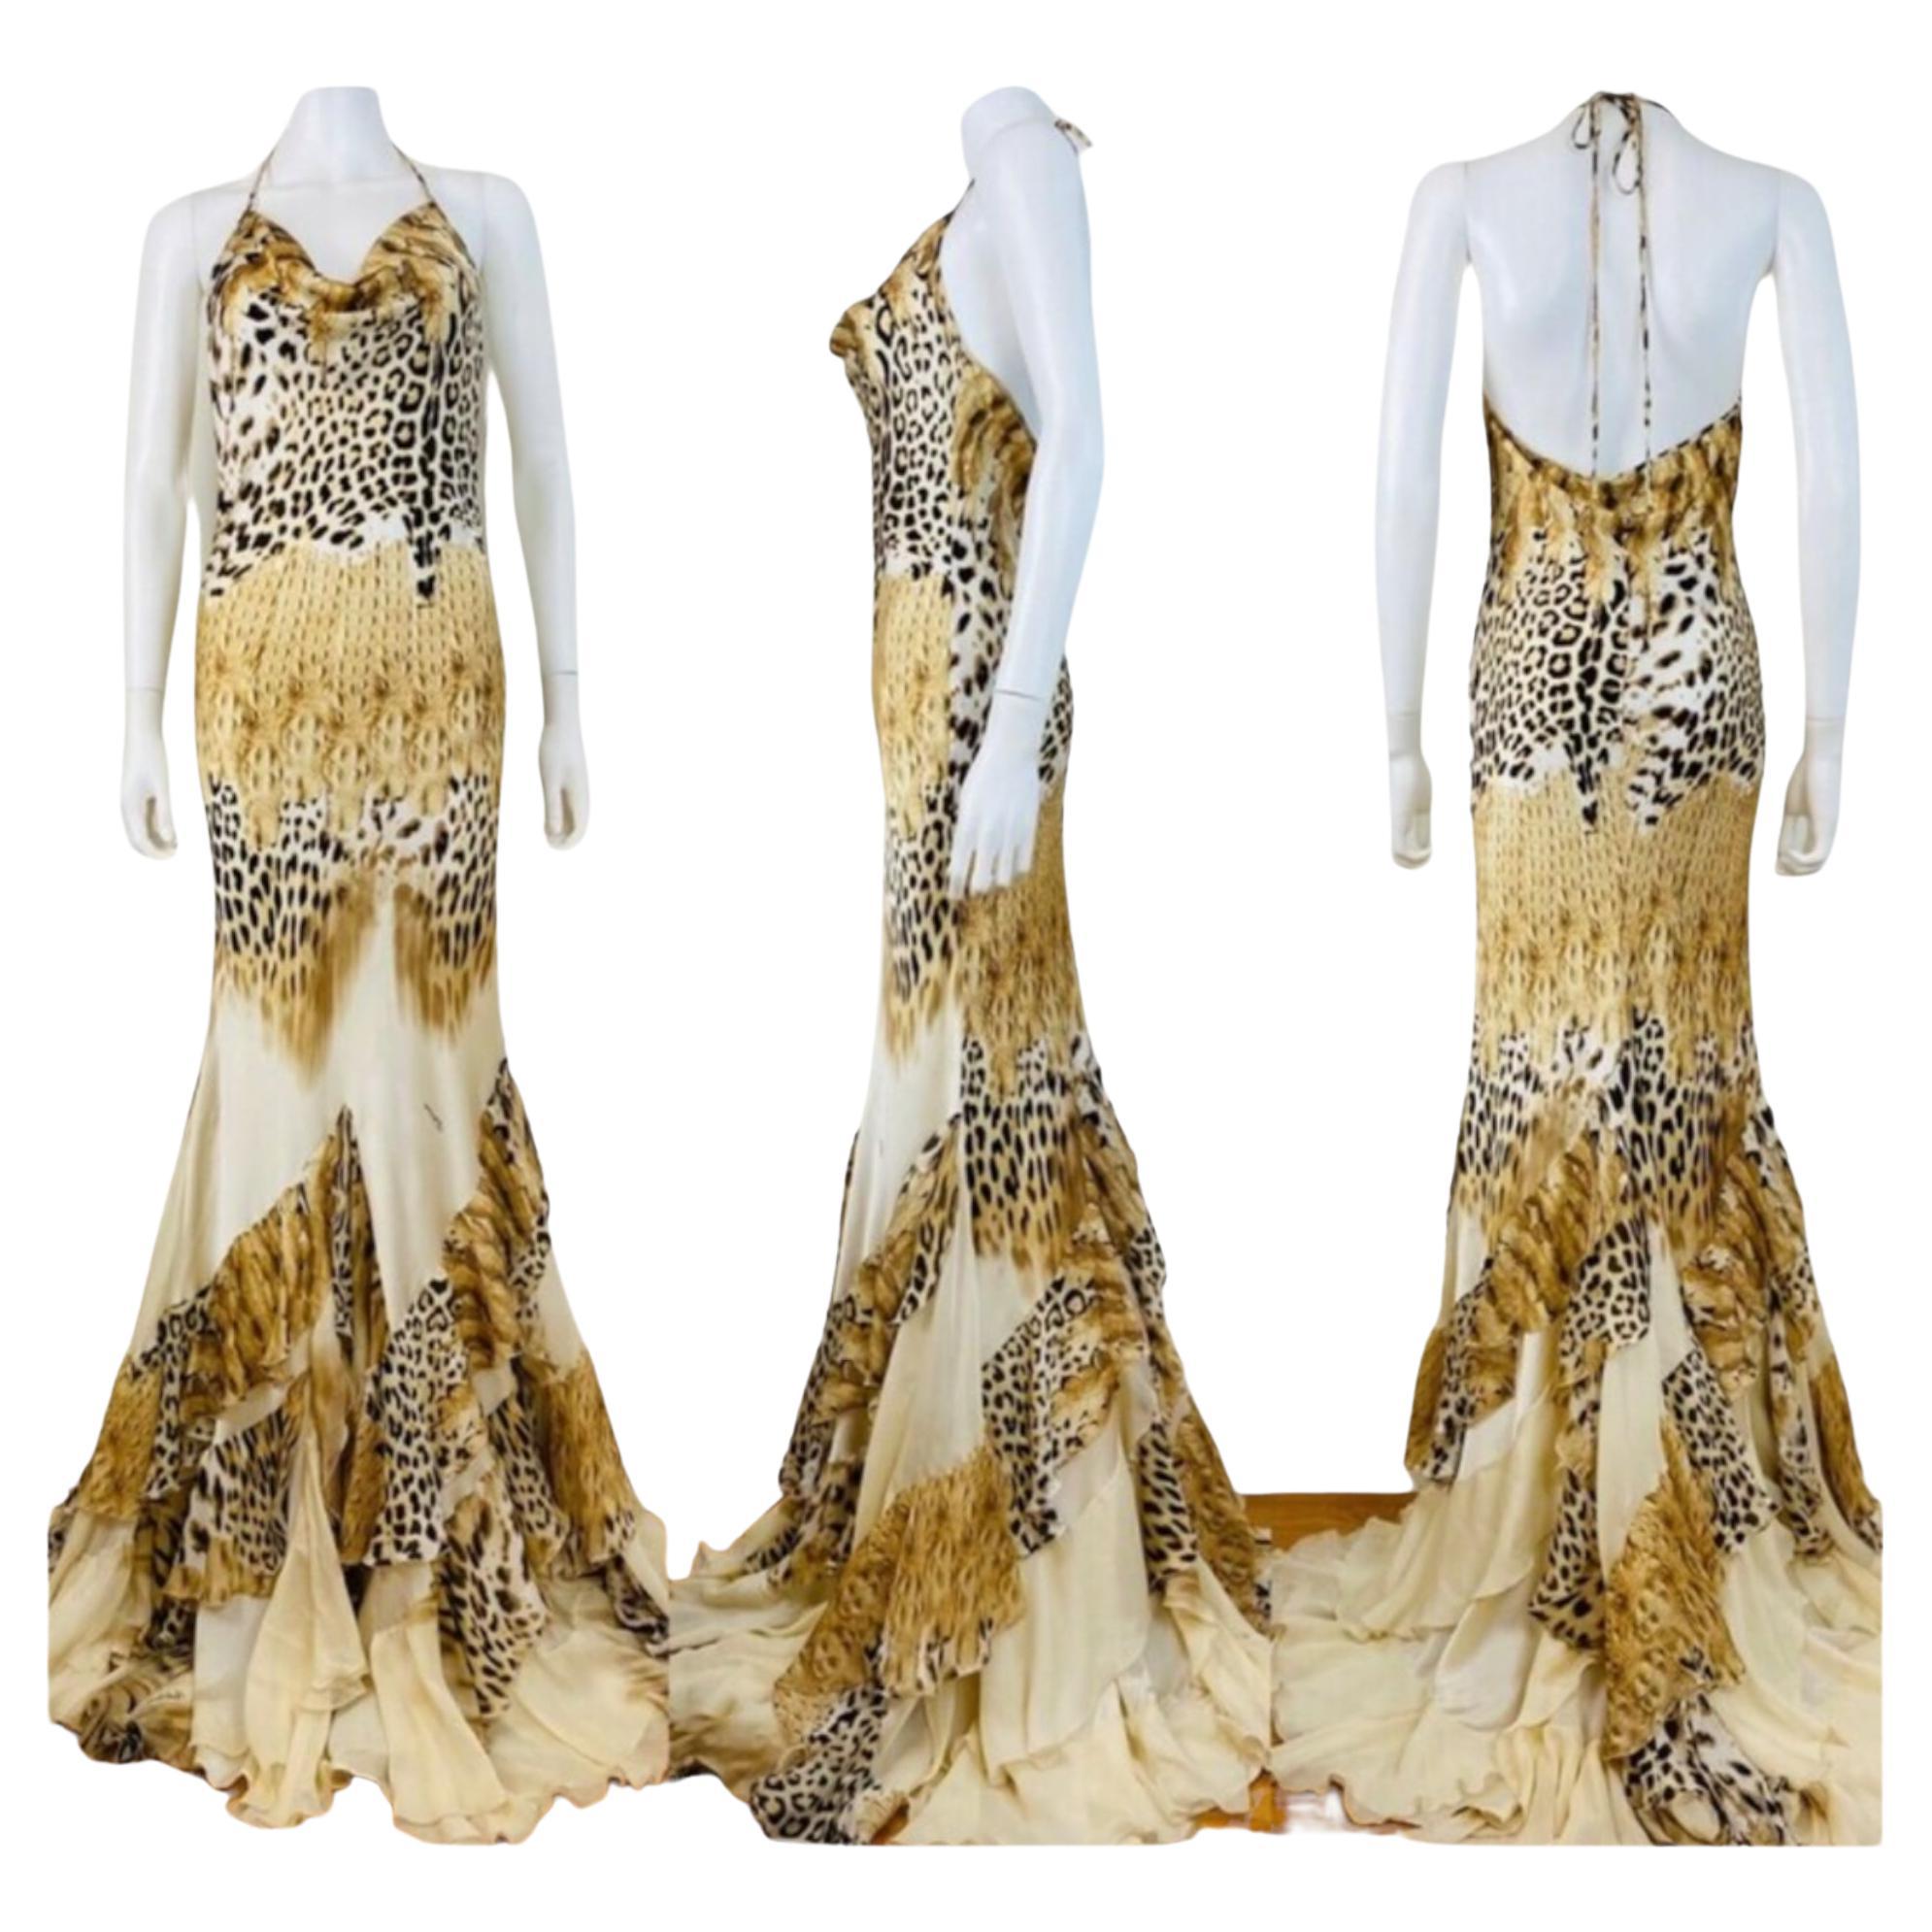 2002 Roberto Cavalli Silk Dress Gown
Cheetah + crocodile print silk fabric
Halter neckline with with long ties
Draped neckline
Fitted bodice
Open upper back
Mermaid hem with ruffled details
Slips on overhead
Unlined

Marked M, Measurements - Bust up